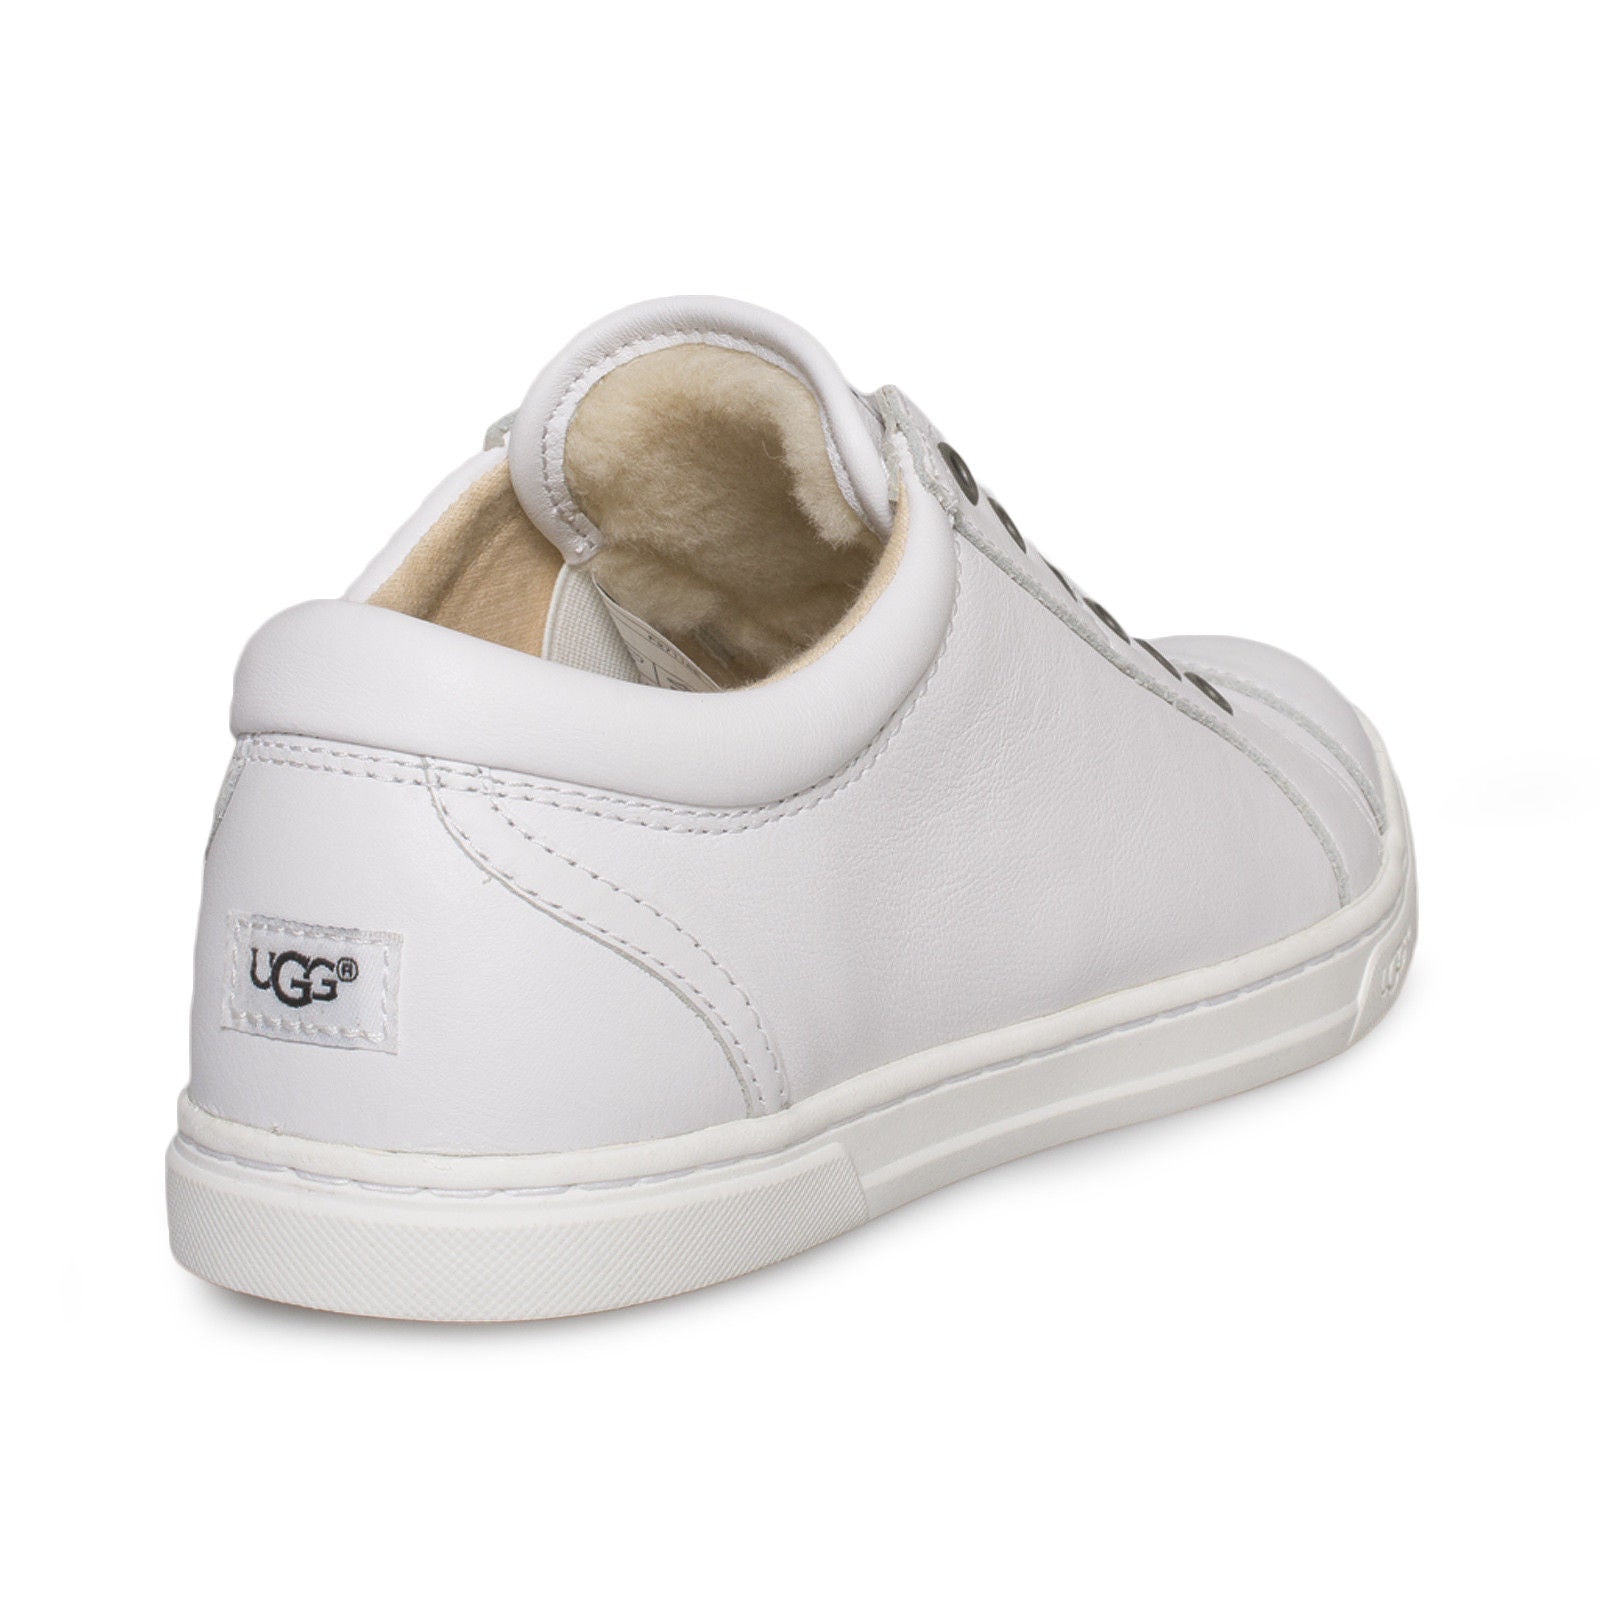 uggs white sneakers